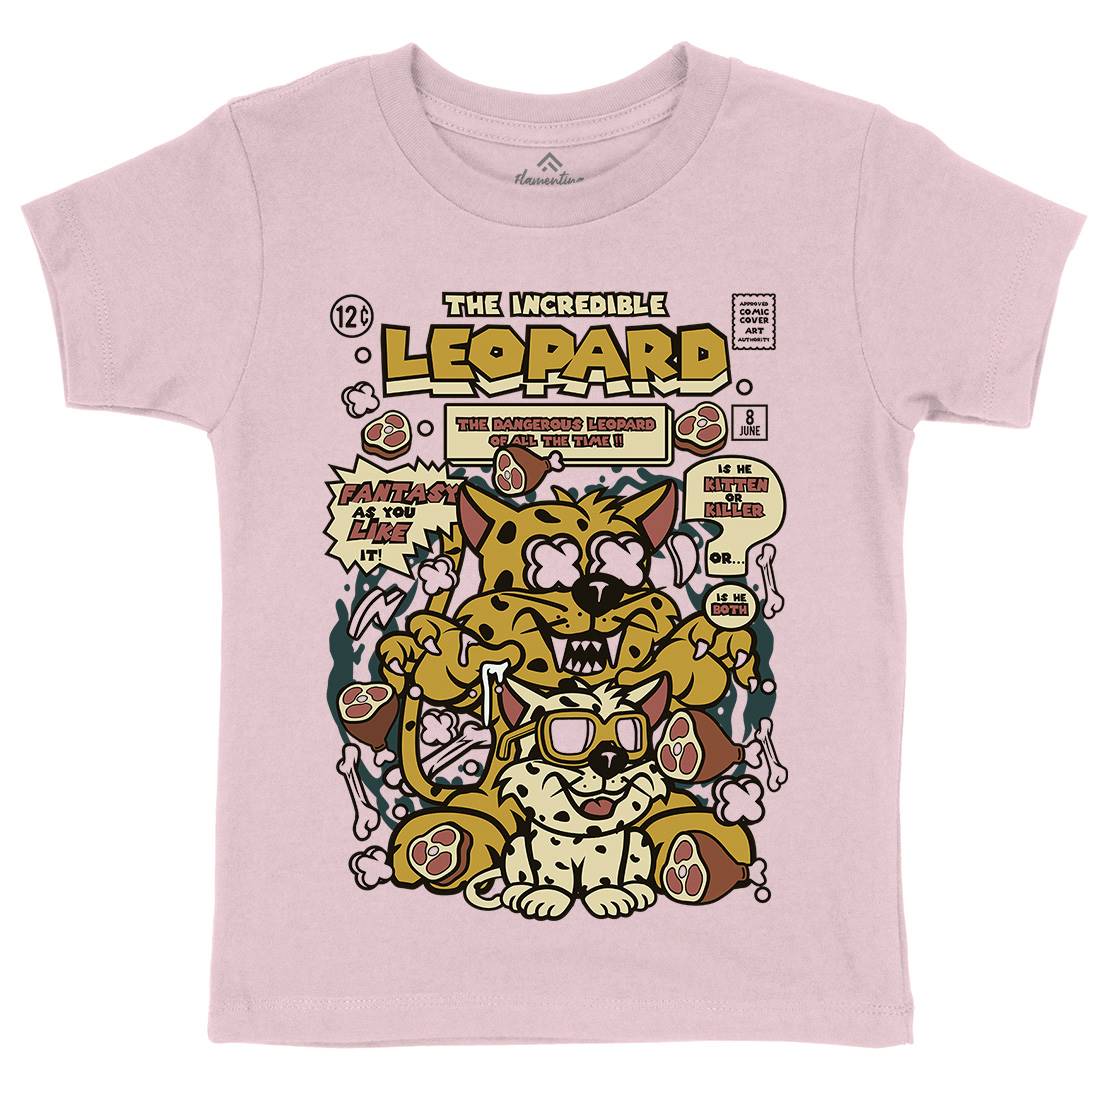 The Incredible Leopard Kids Crew Neck T-Shirt Animals C677